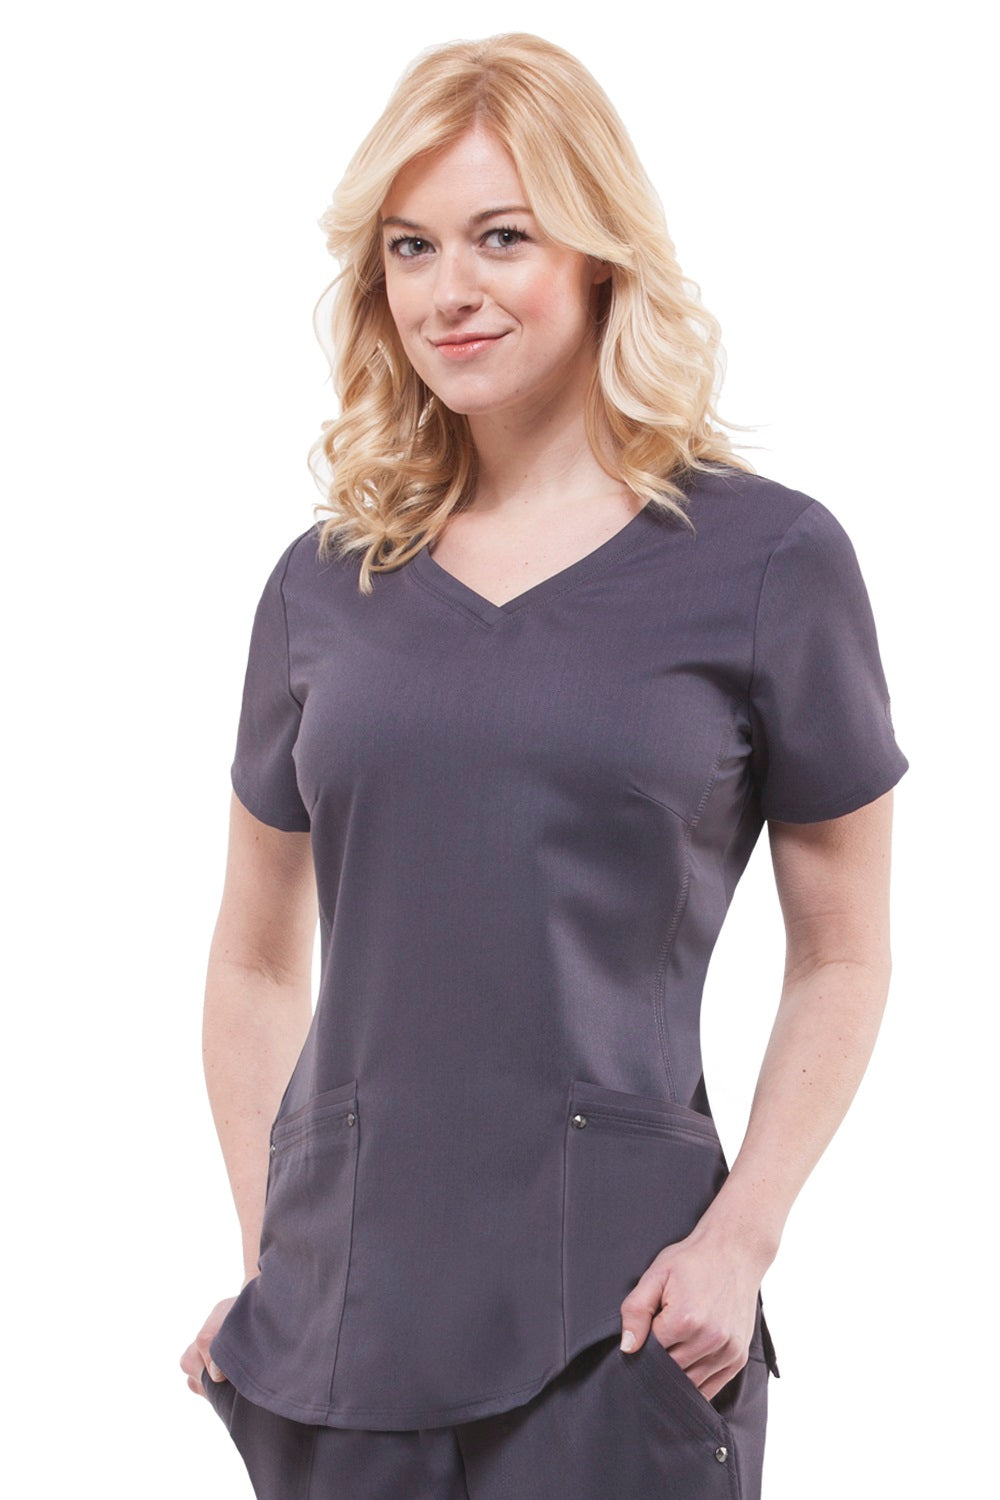 Healing Hands Purple Label Juliet Scrub Top in Pewter at Parker's Clothing and Shoes.